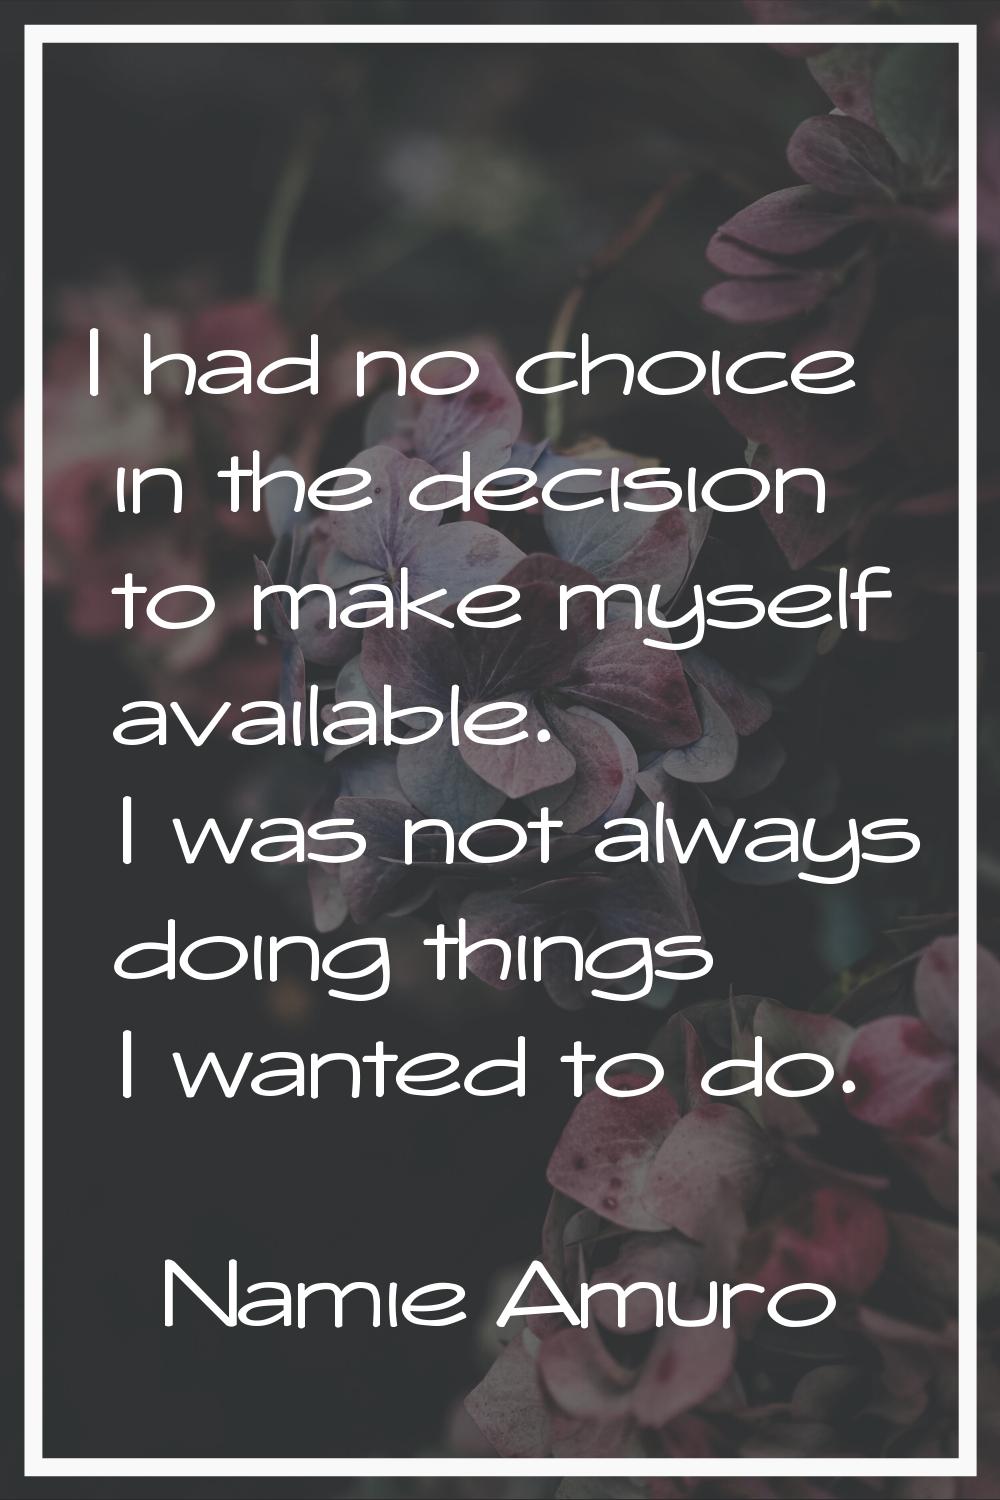 I had no choice in the decision to make myself available. I was not always doing things I wanted to